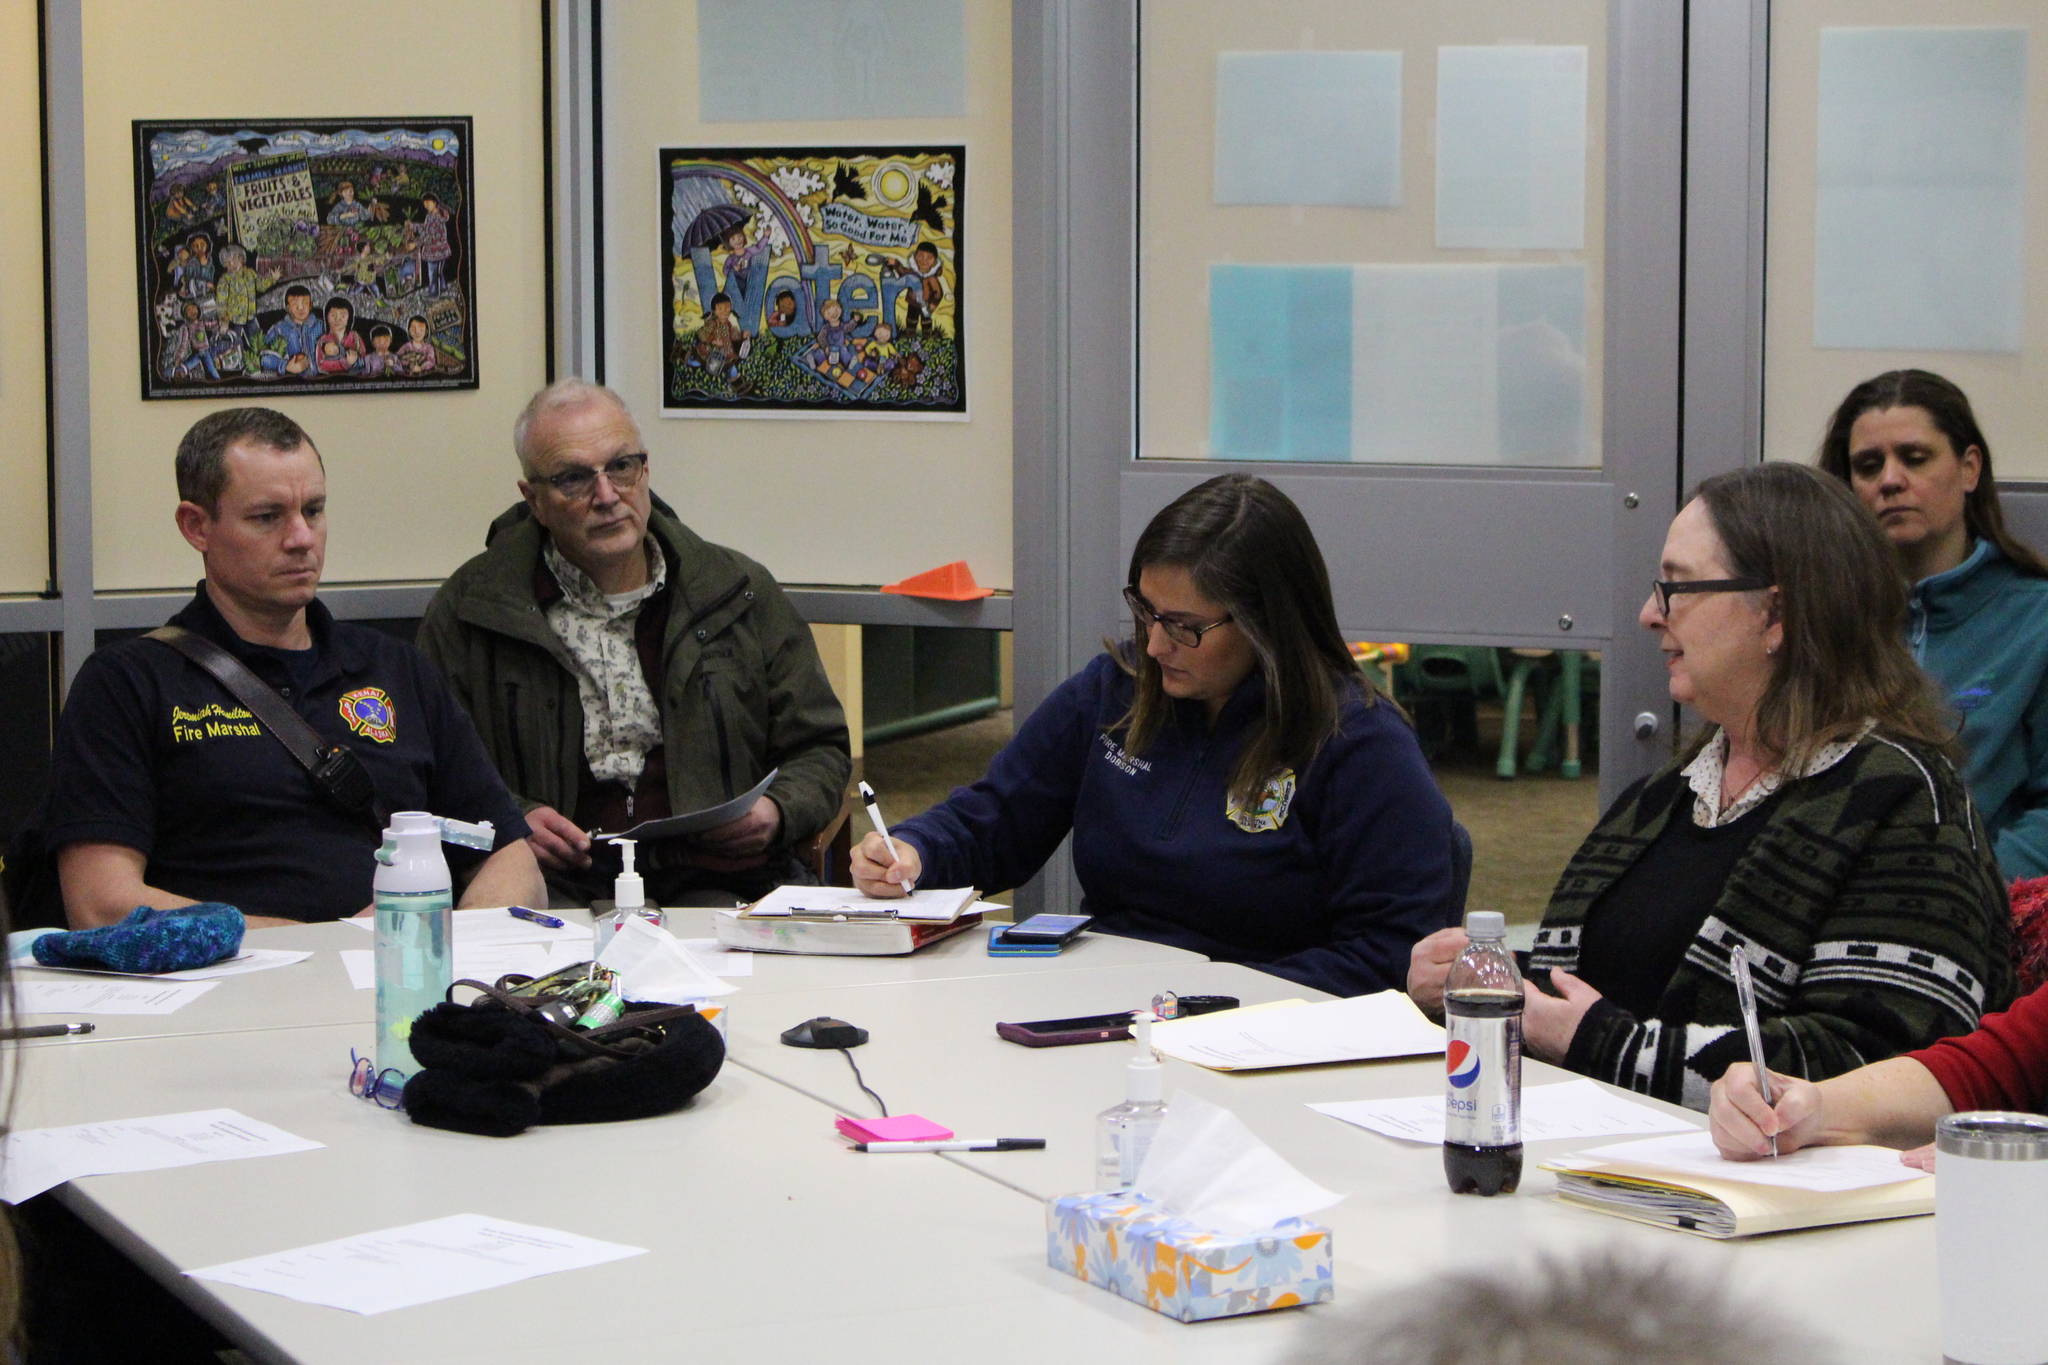 Brian Mazurek / Peninsula Clarion                                Fire Marshals Jeremy Hamilton (left) and Brooke Dobson (center right) meet with members of the Shelter Development Workgroup at the Kenai Public Health Center in Kenai on Jan. 8.